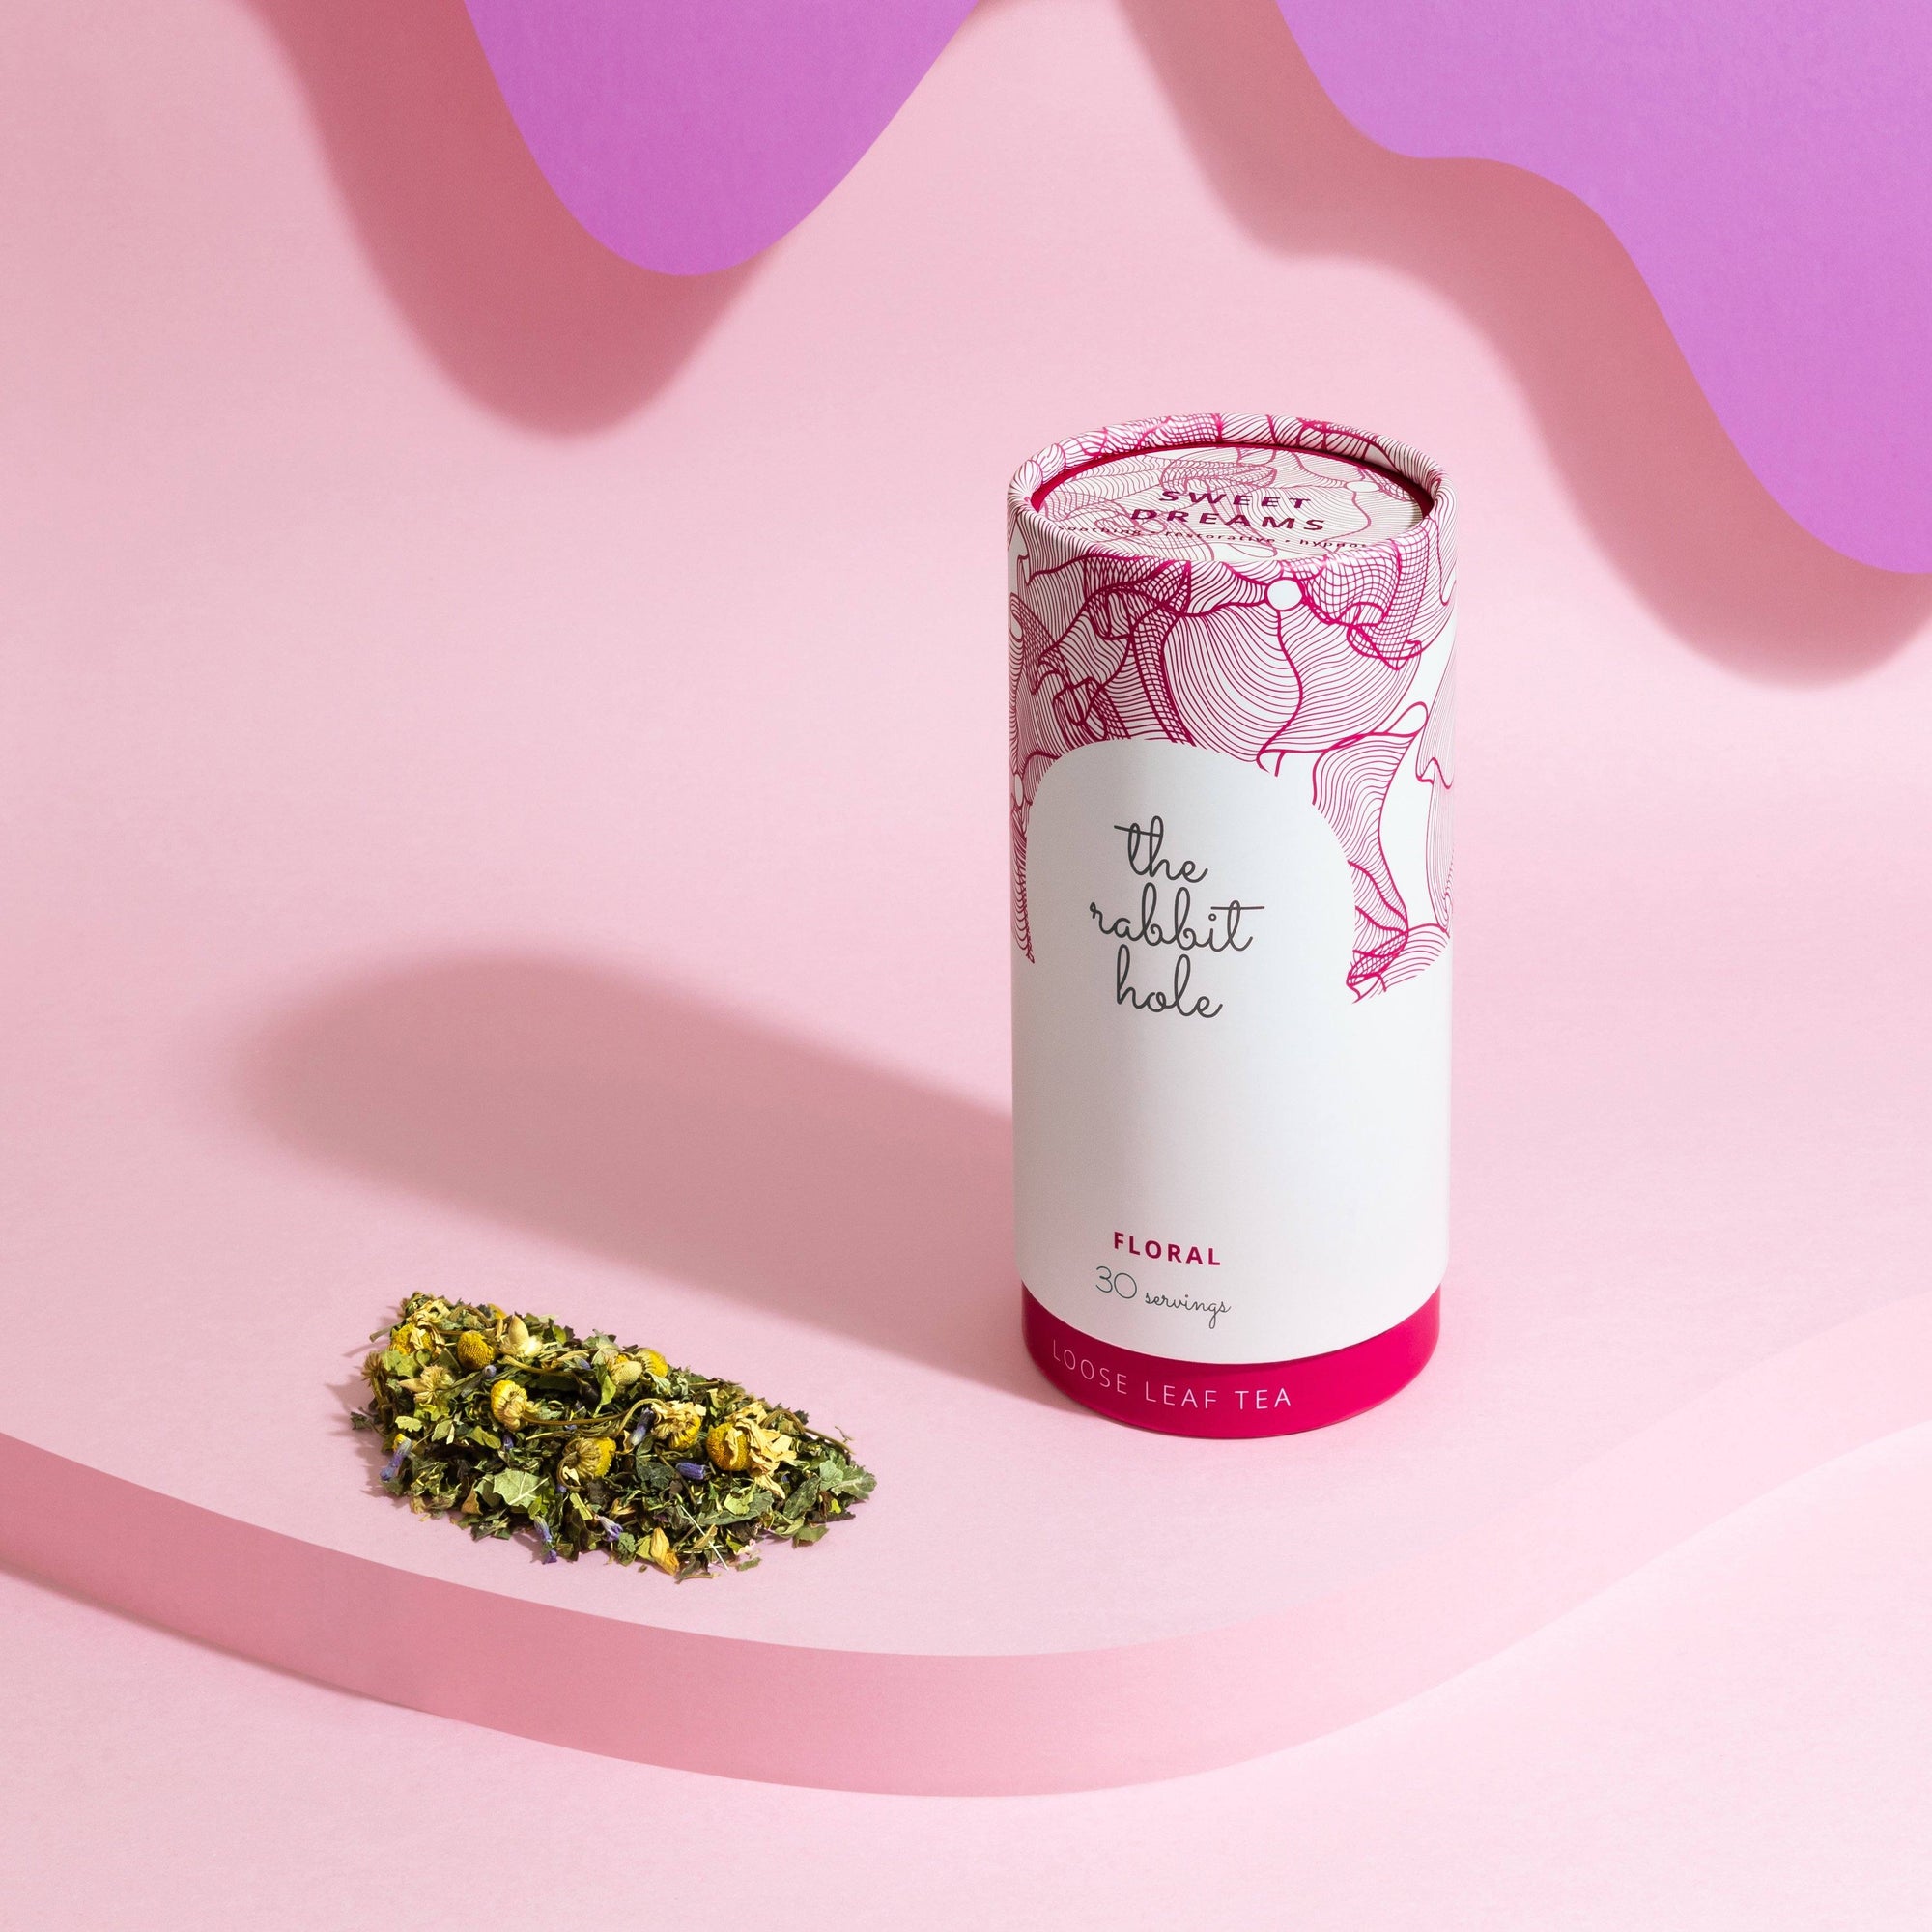 Sweet Dreams Floral loose leaf tea by The Rabbit Hole - Australian Made Tea - canister on a pink and purple background